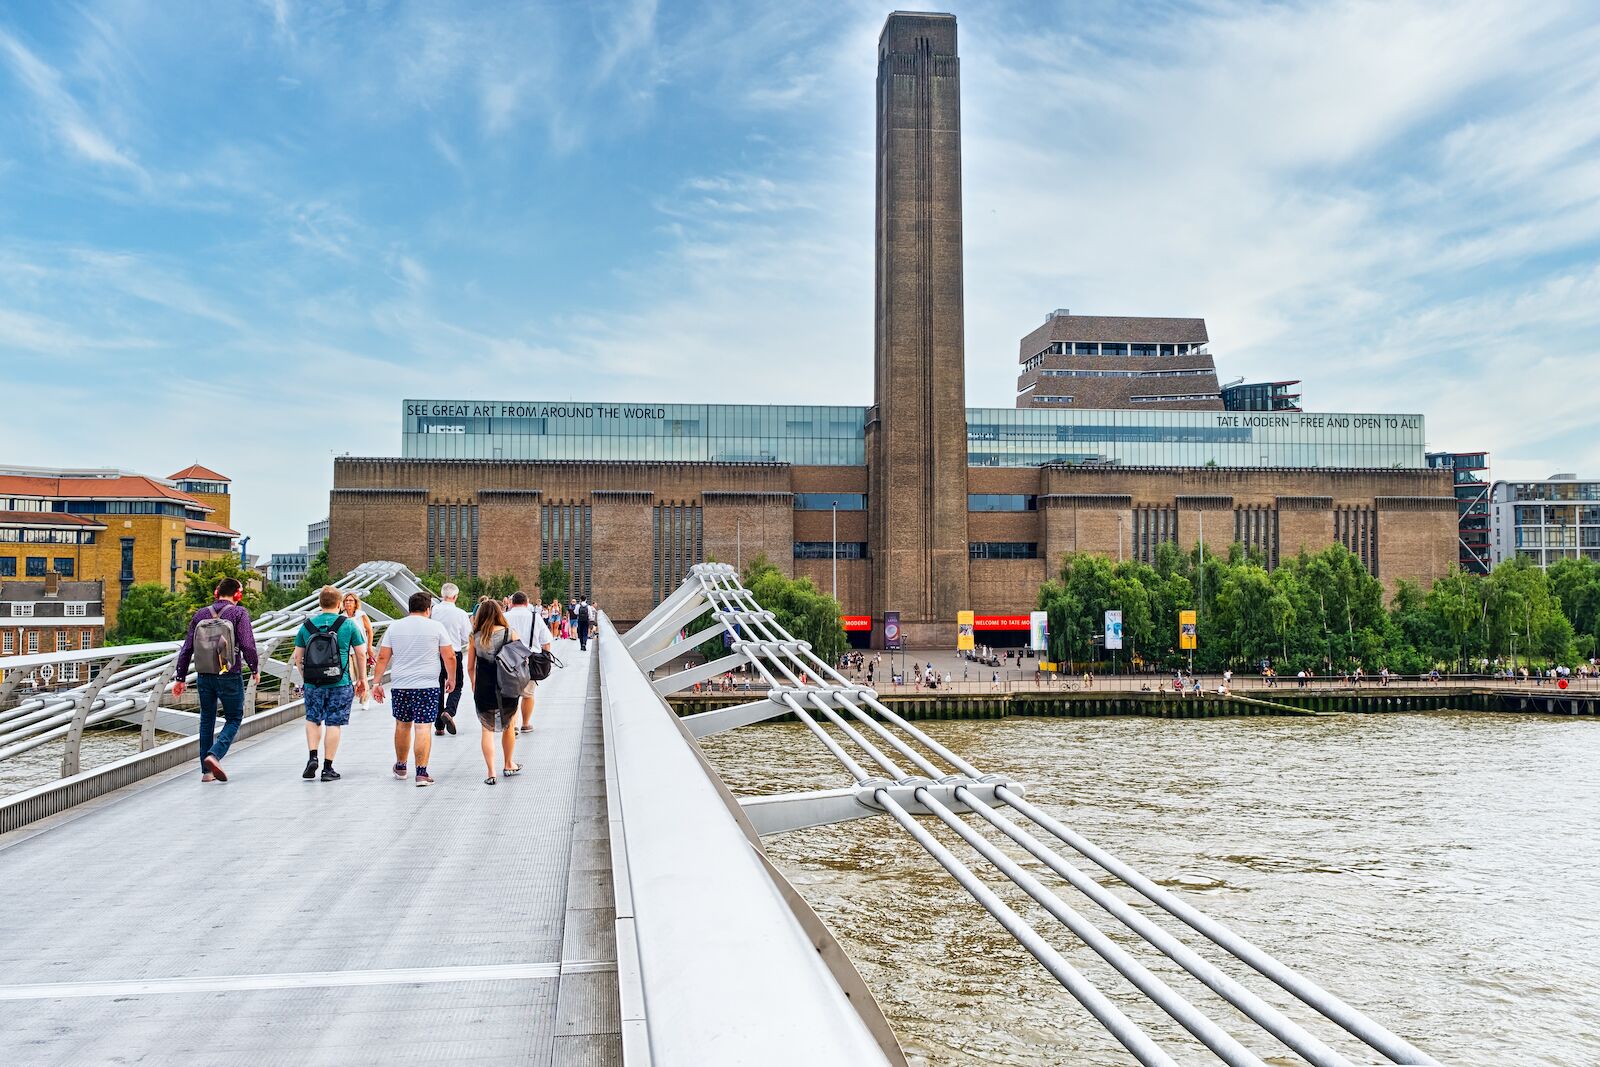 The Tate Modern is one of London's best museums